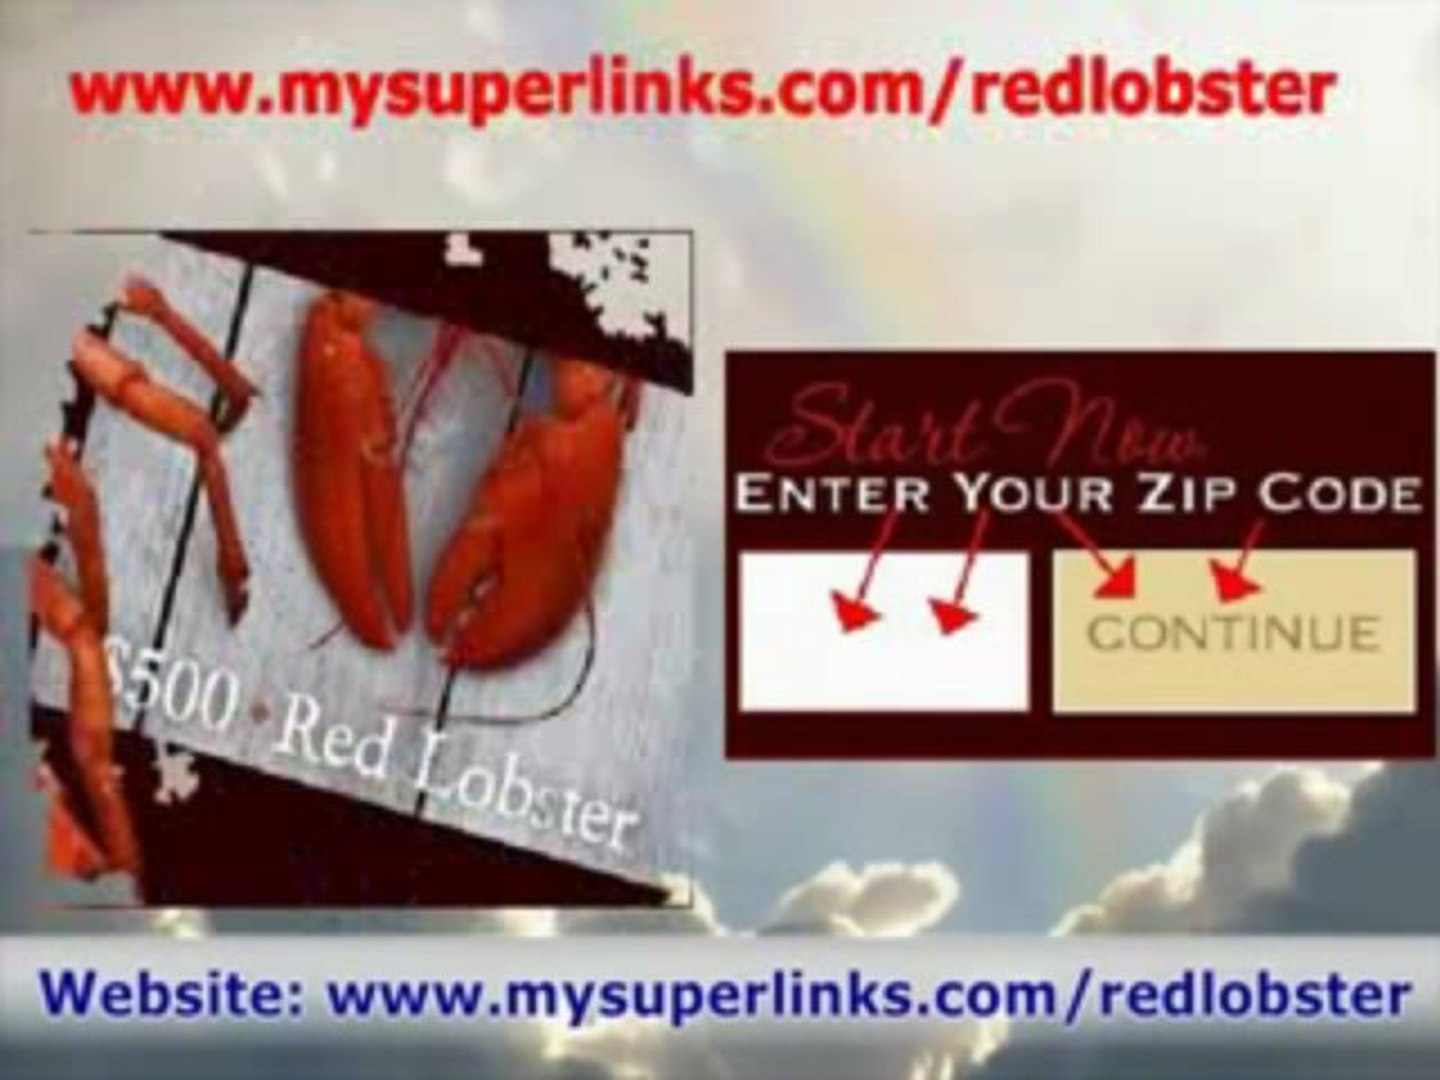 Red Lobster Printable Online Coupons Free) *$500 Cards* - Video - Free Printable Red Lobster Coupons